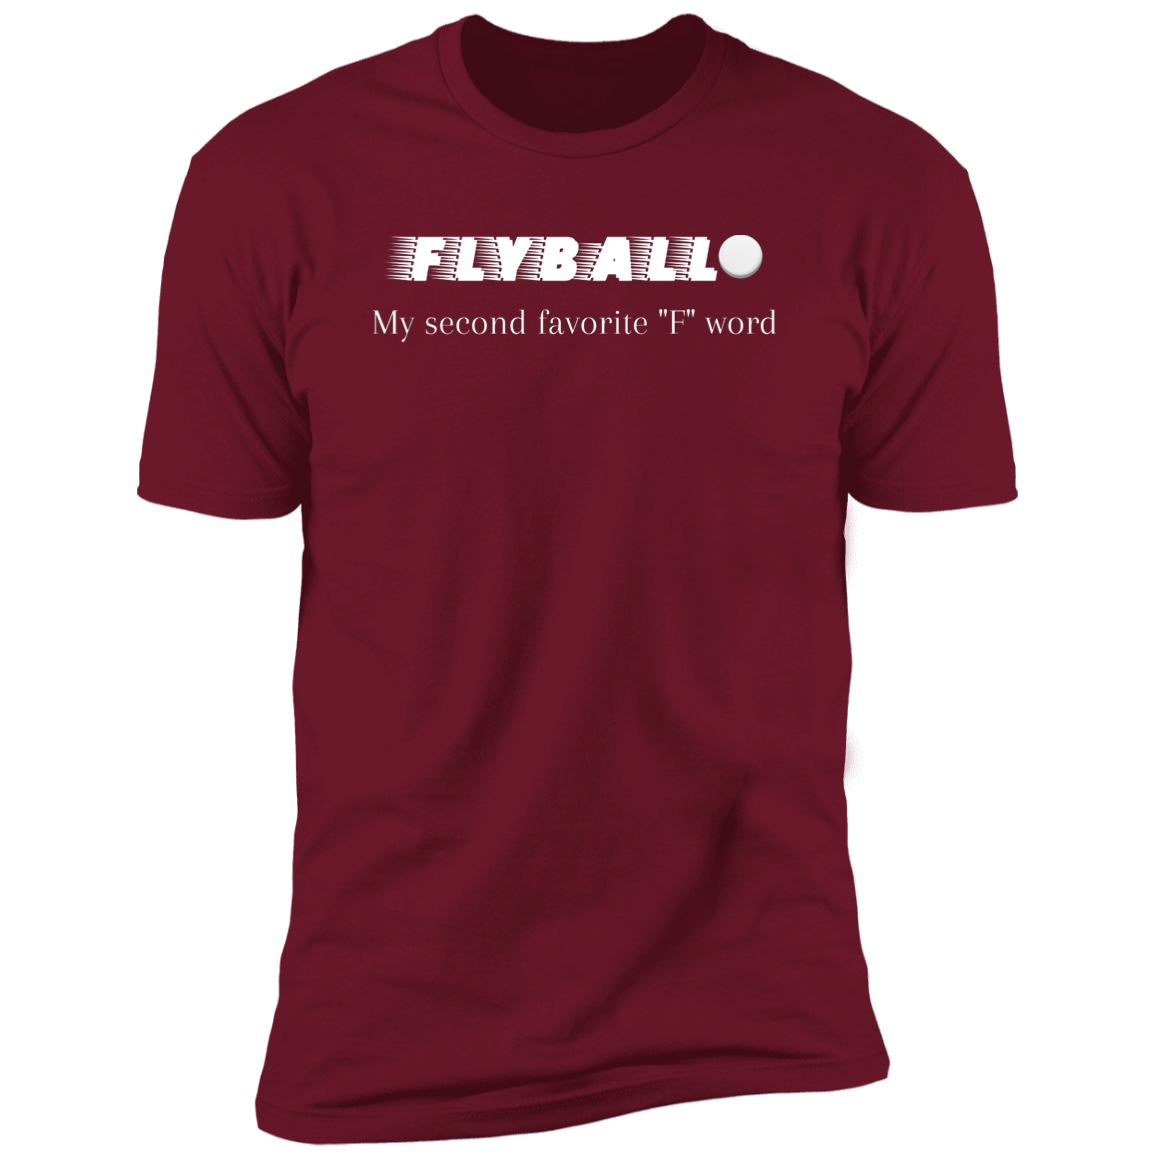 Flyball My second favorite 'f' word flyball t-shirt, dog shirt for humans, sporting dog shirt, in cardinal red